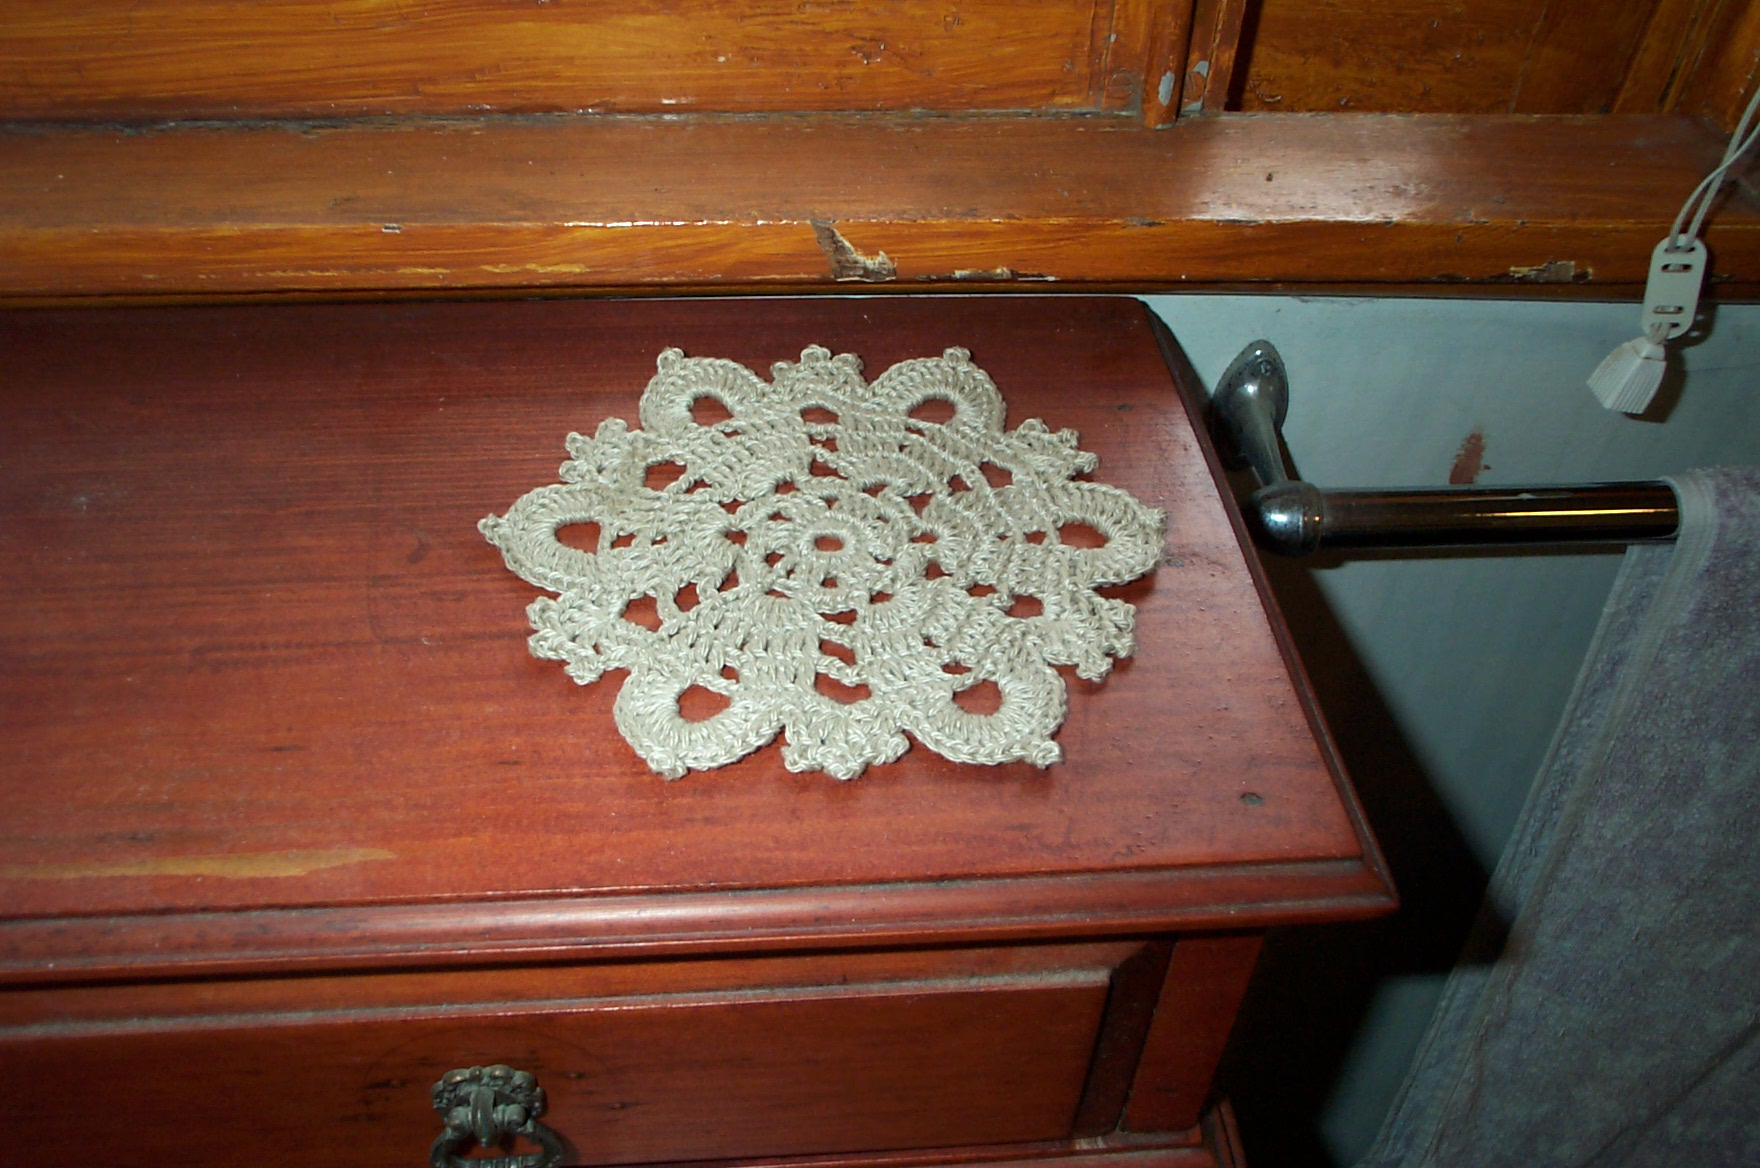 1 of a set of 2 of my more recent doilies